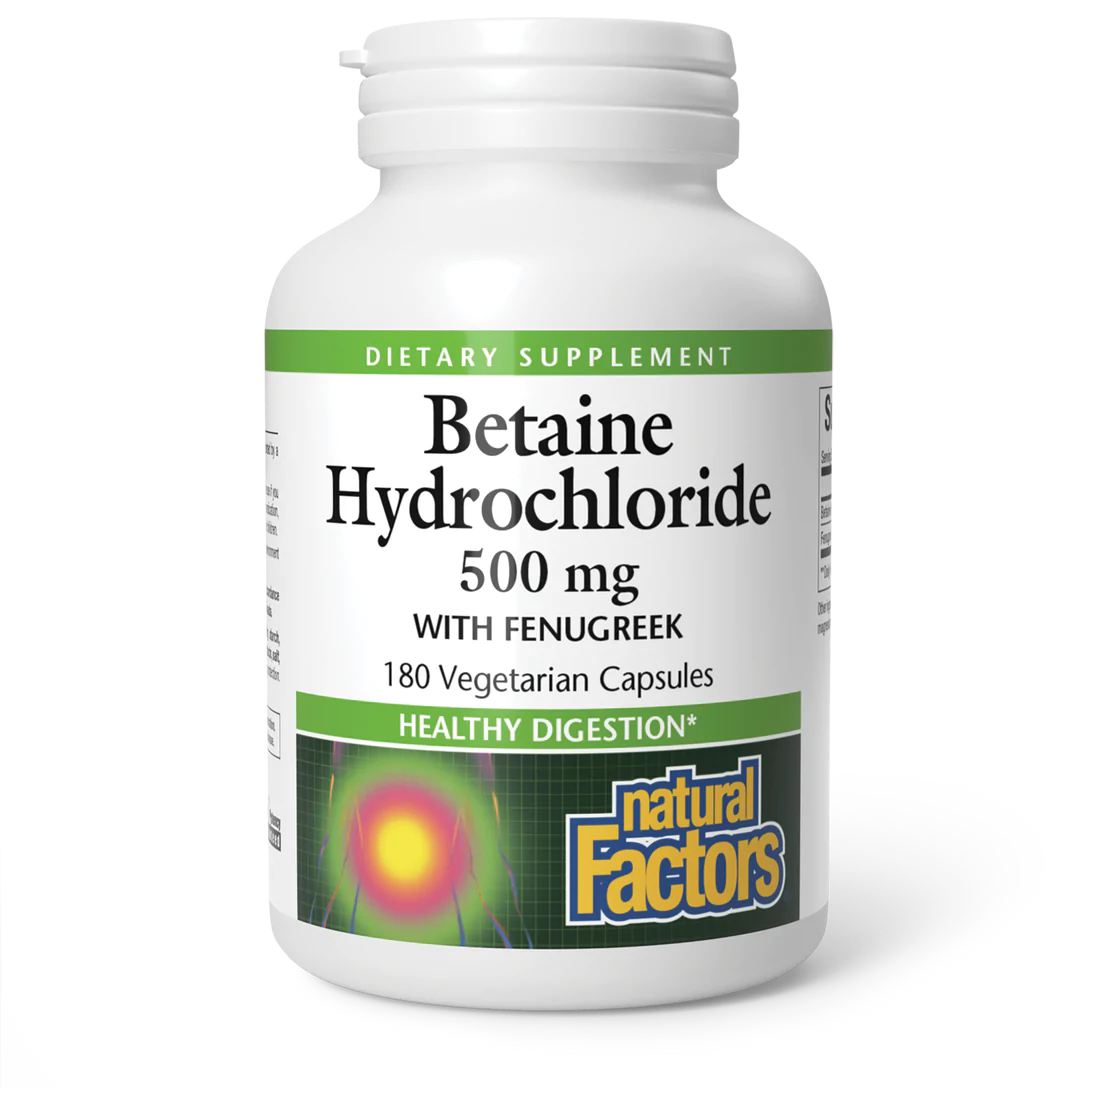 Betaine Hydrochloride 500mg (180 Vegetarian Capsules)